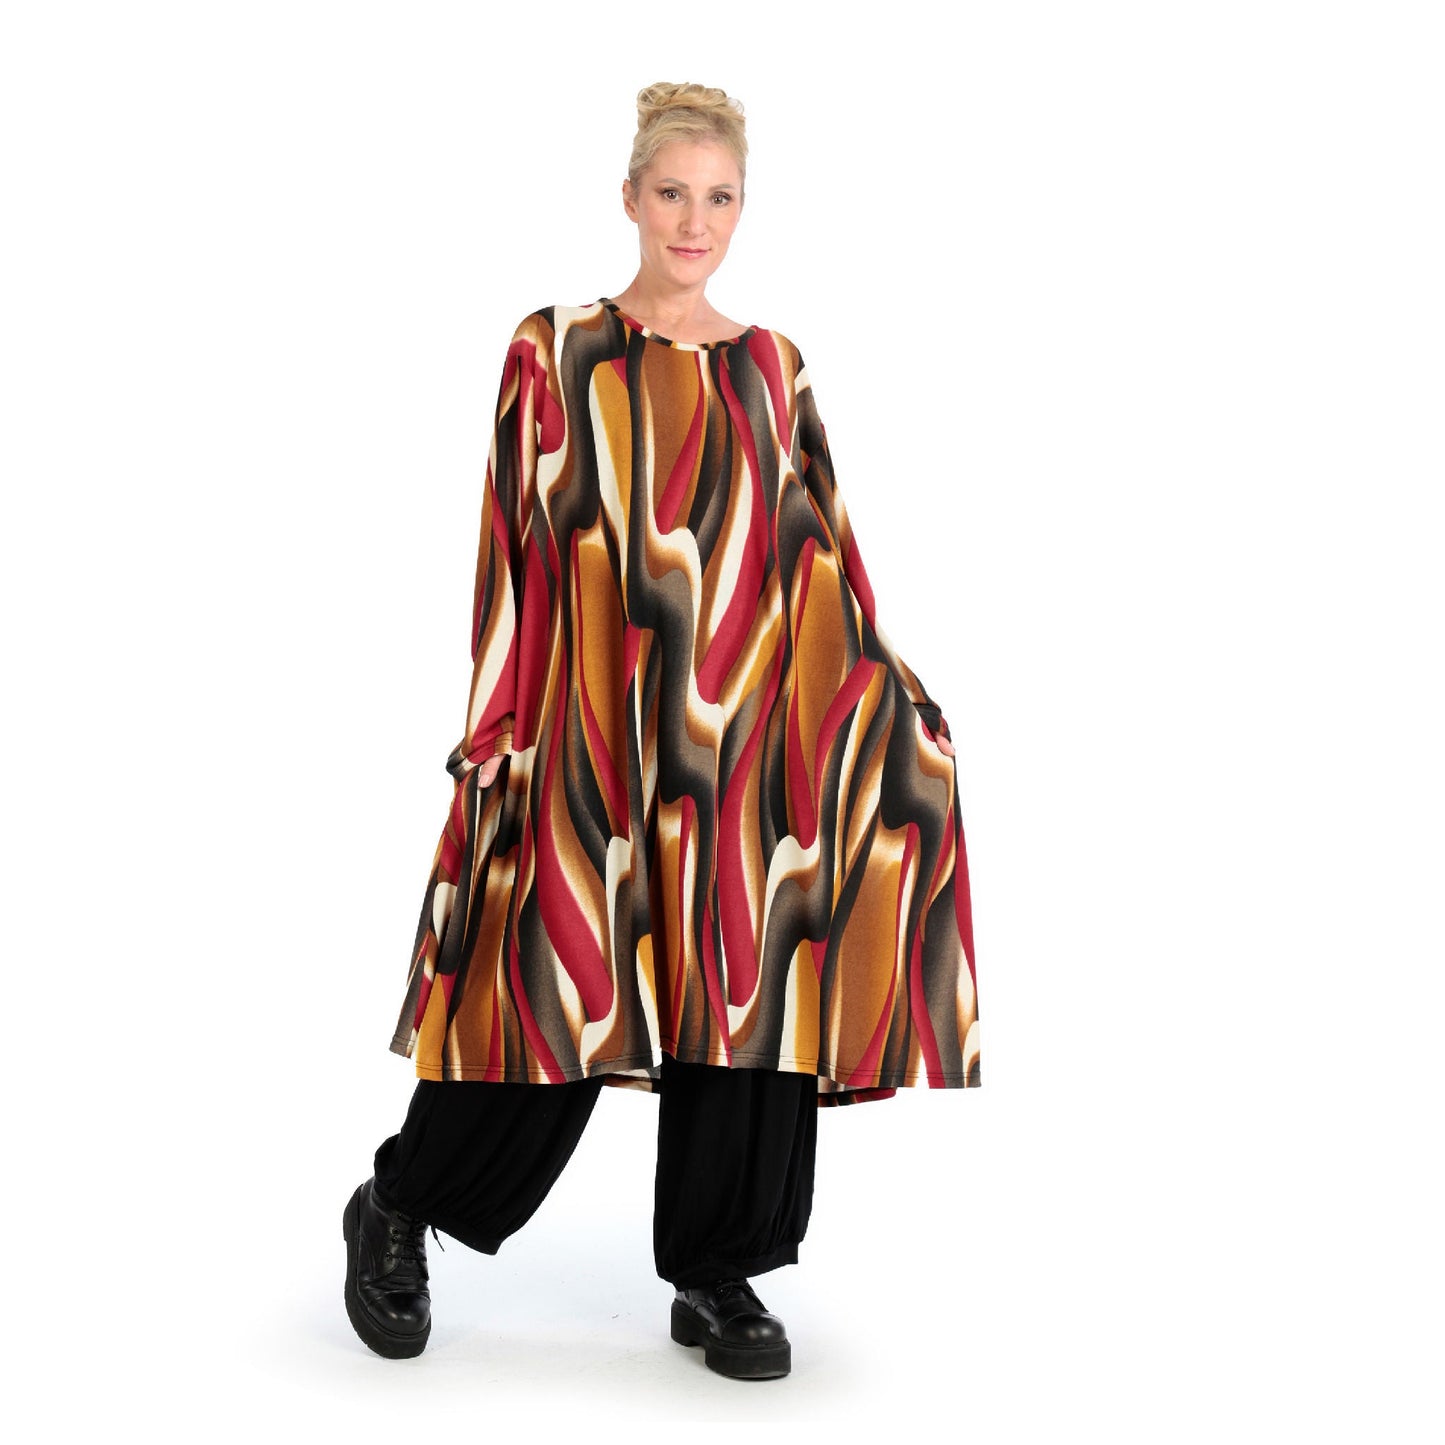 Winter dress in A-shape made of soft fine knit quality, Aurora in cognac-red-white